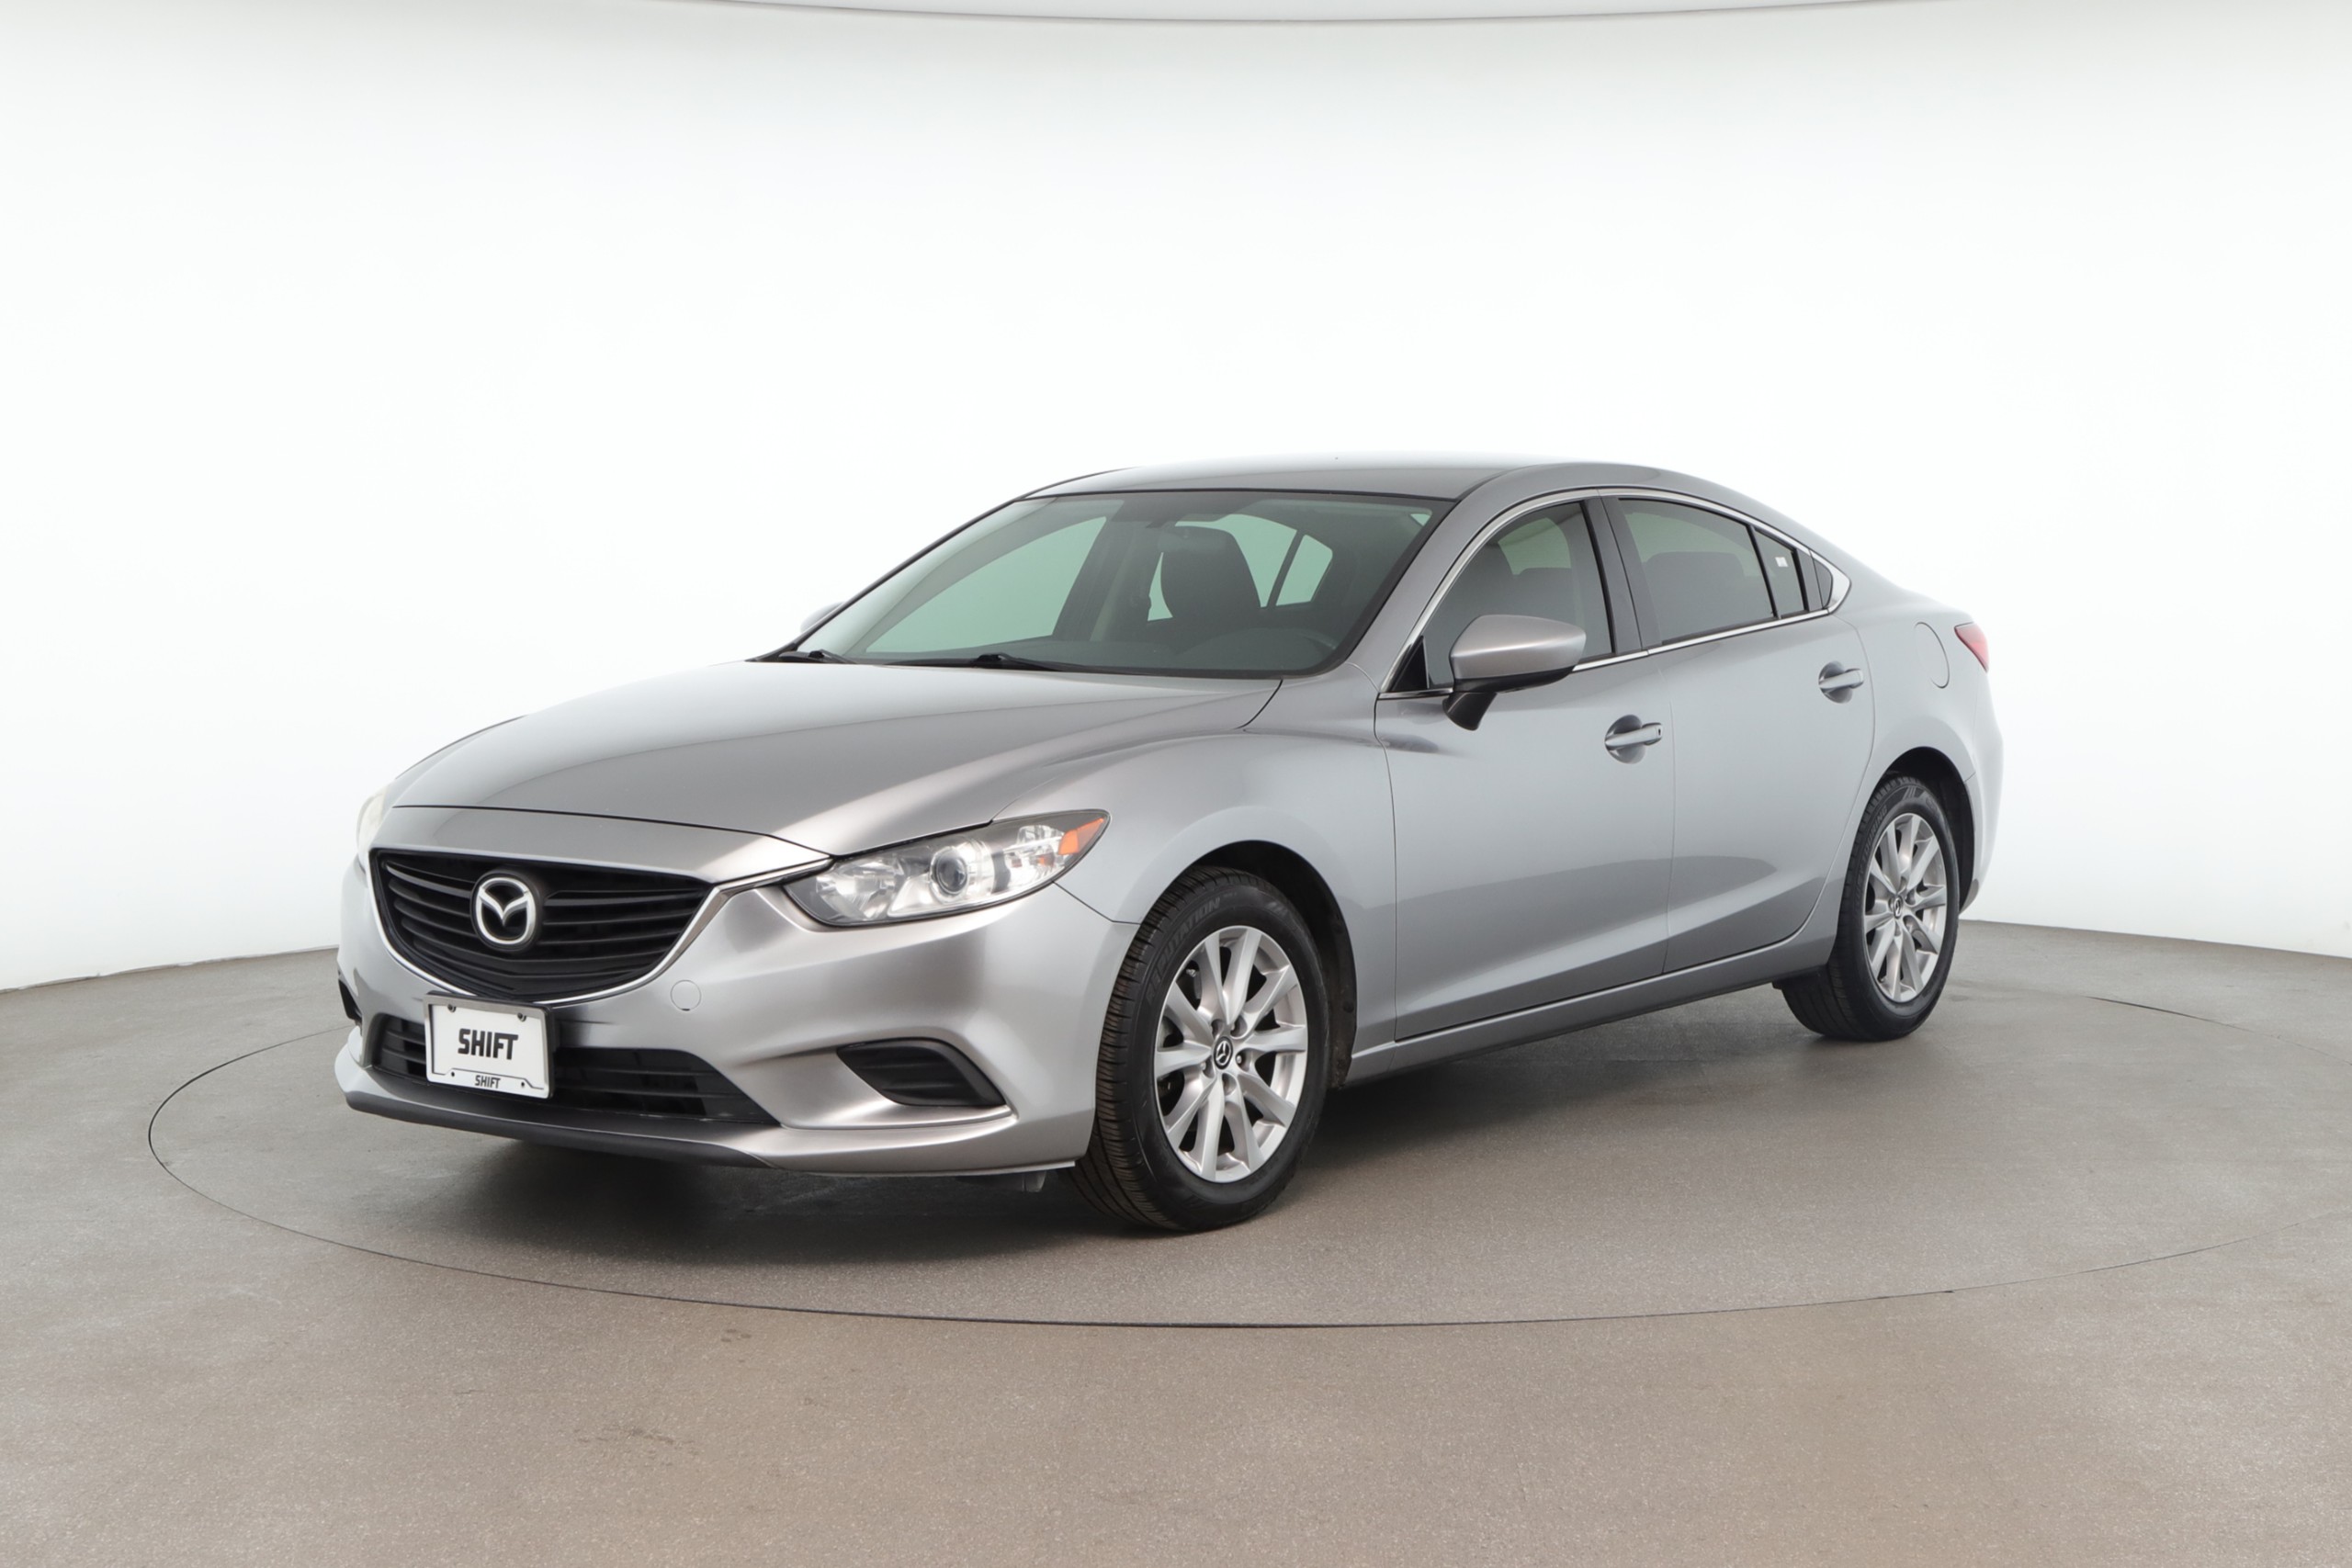 Mazda 6 Review: Which Edition Is Better? | Shift